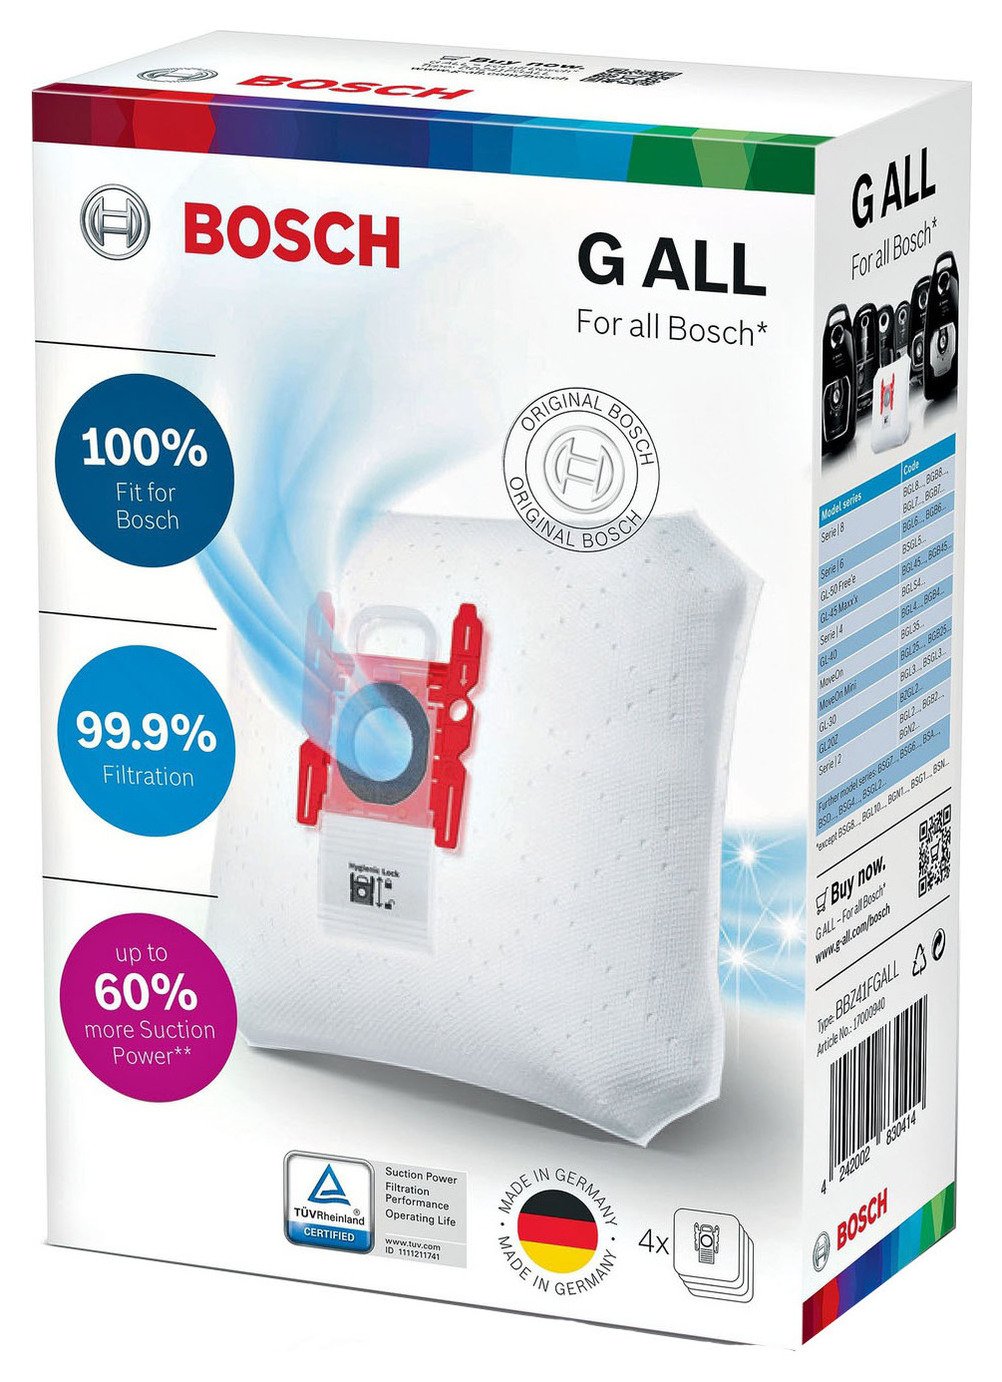 Bosch G ALL Dust Bags - Pack of 4